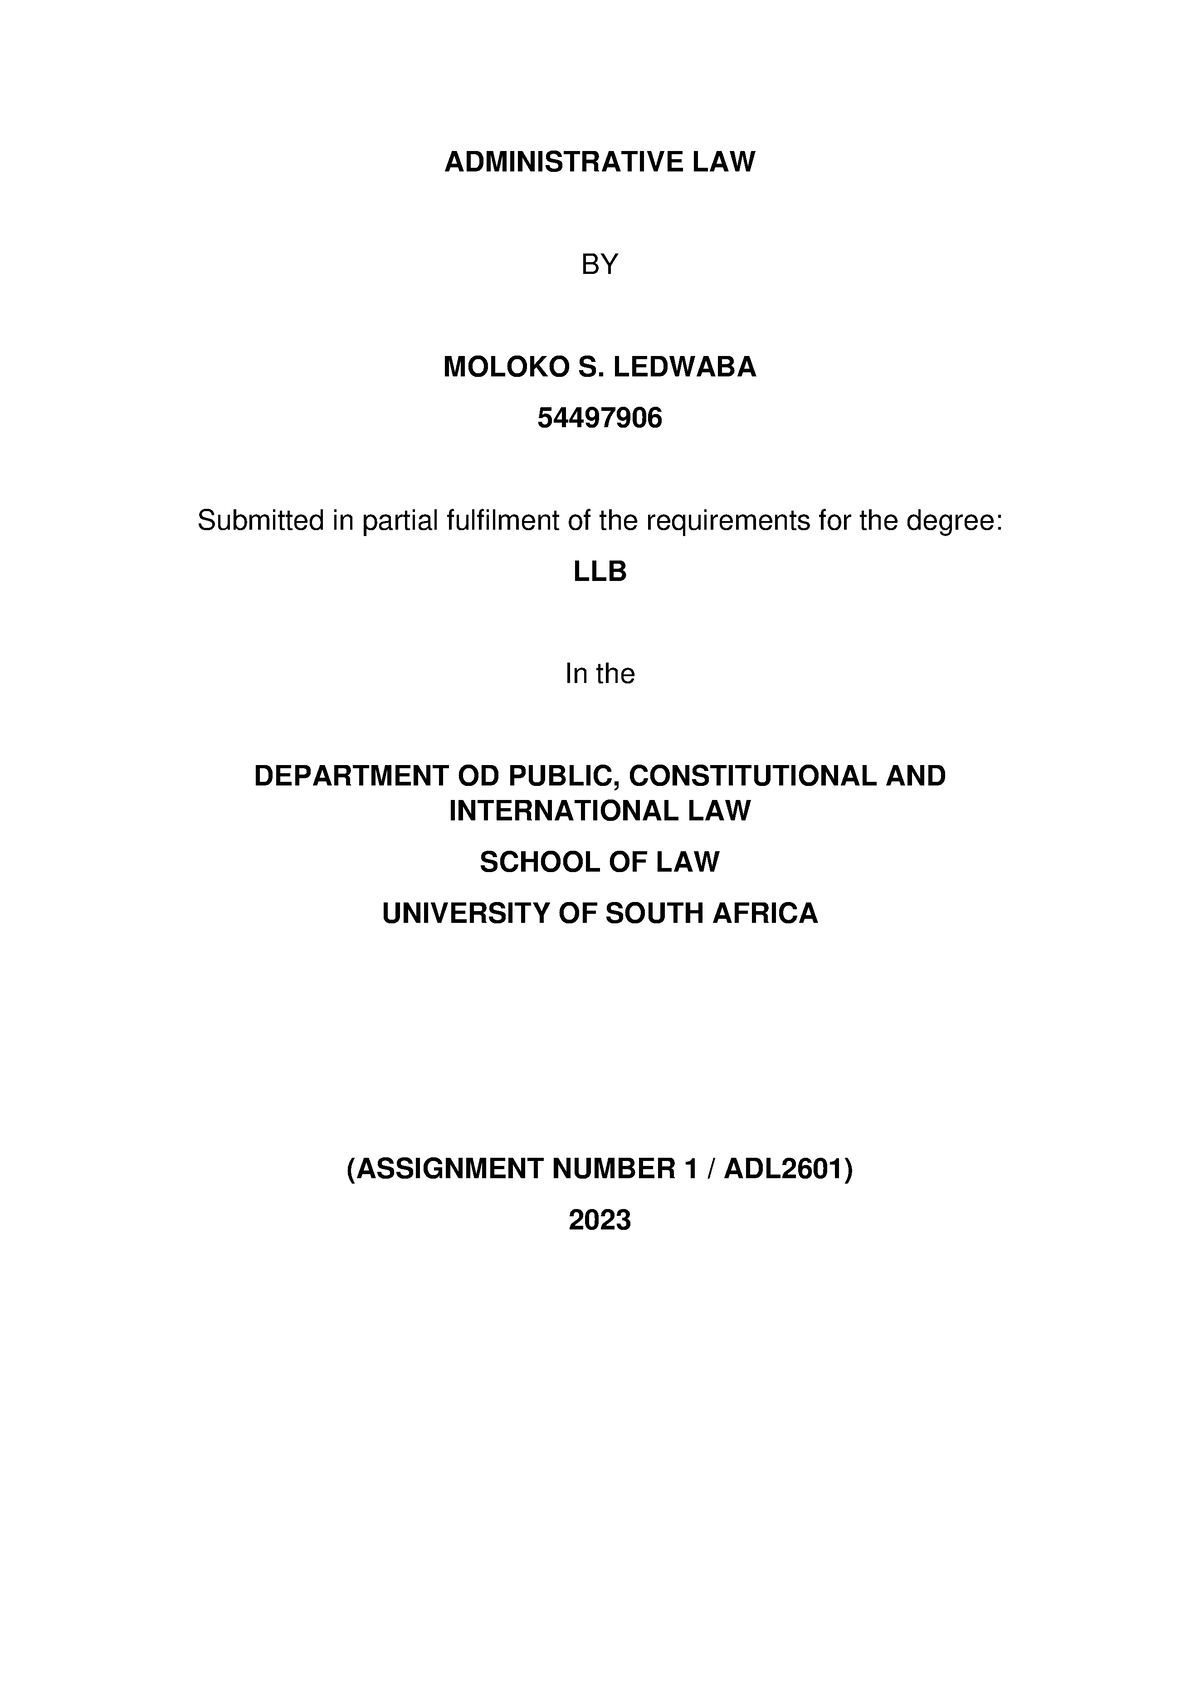 MS. Ledwaba 54497906. ADL2601. Assignment 1. 04 - ADMINISTRATIVE LAW BY ...